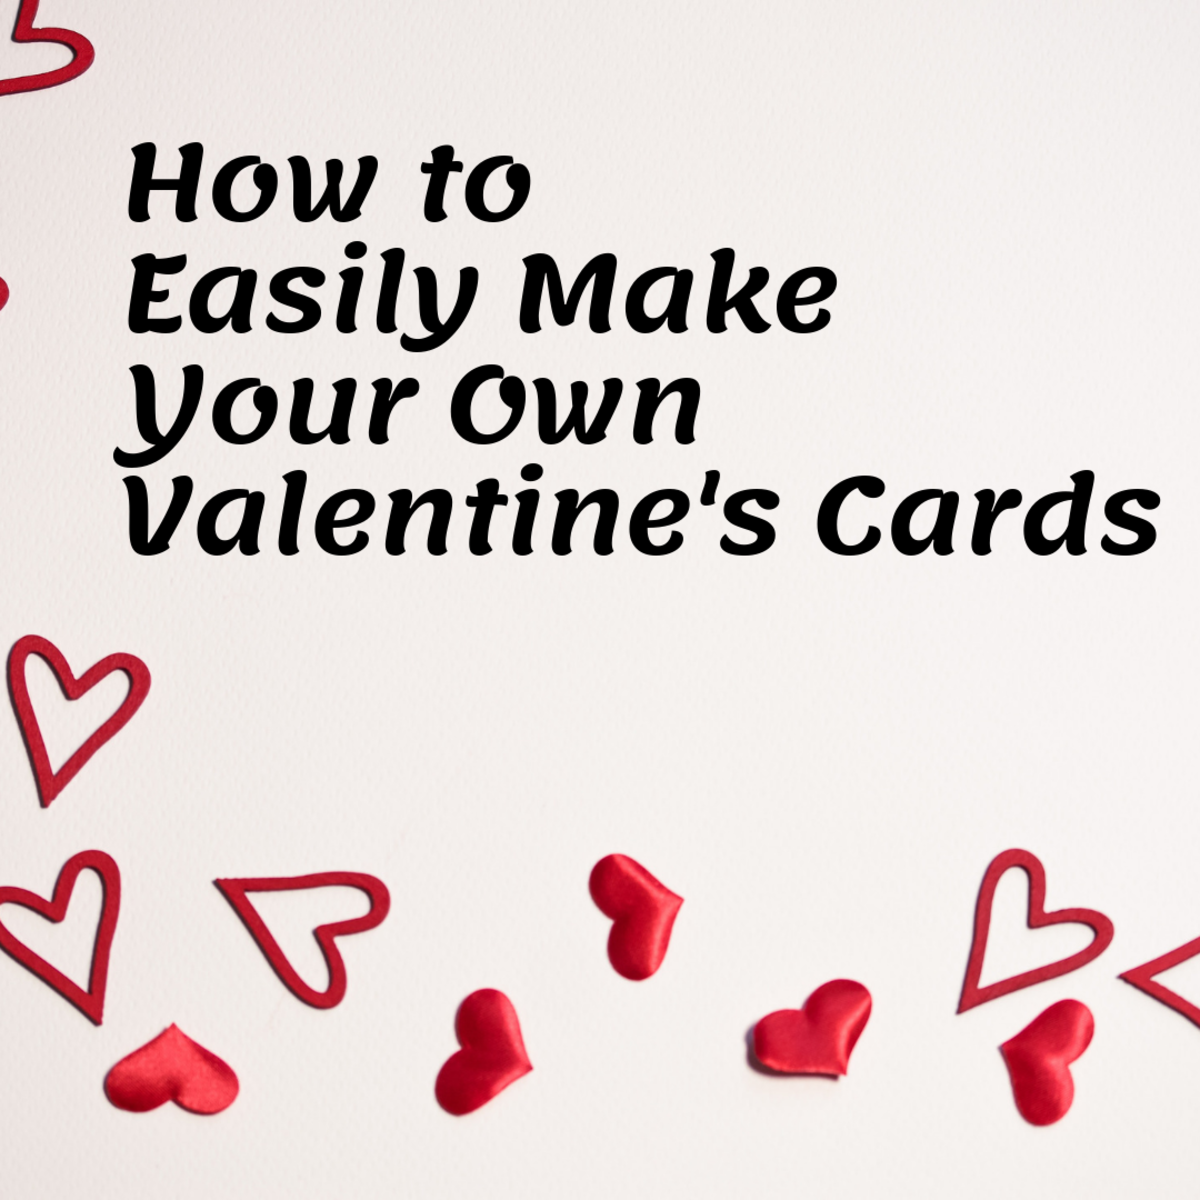 How to Easily Make Your Own Valentine's Cards